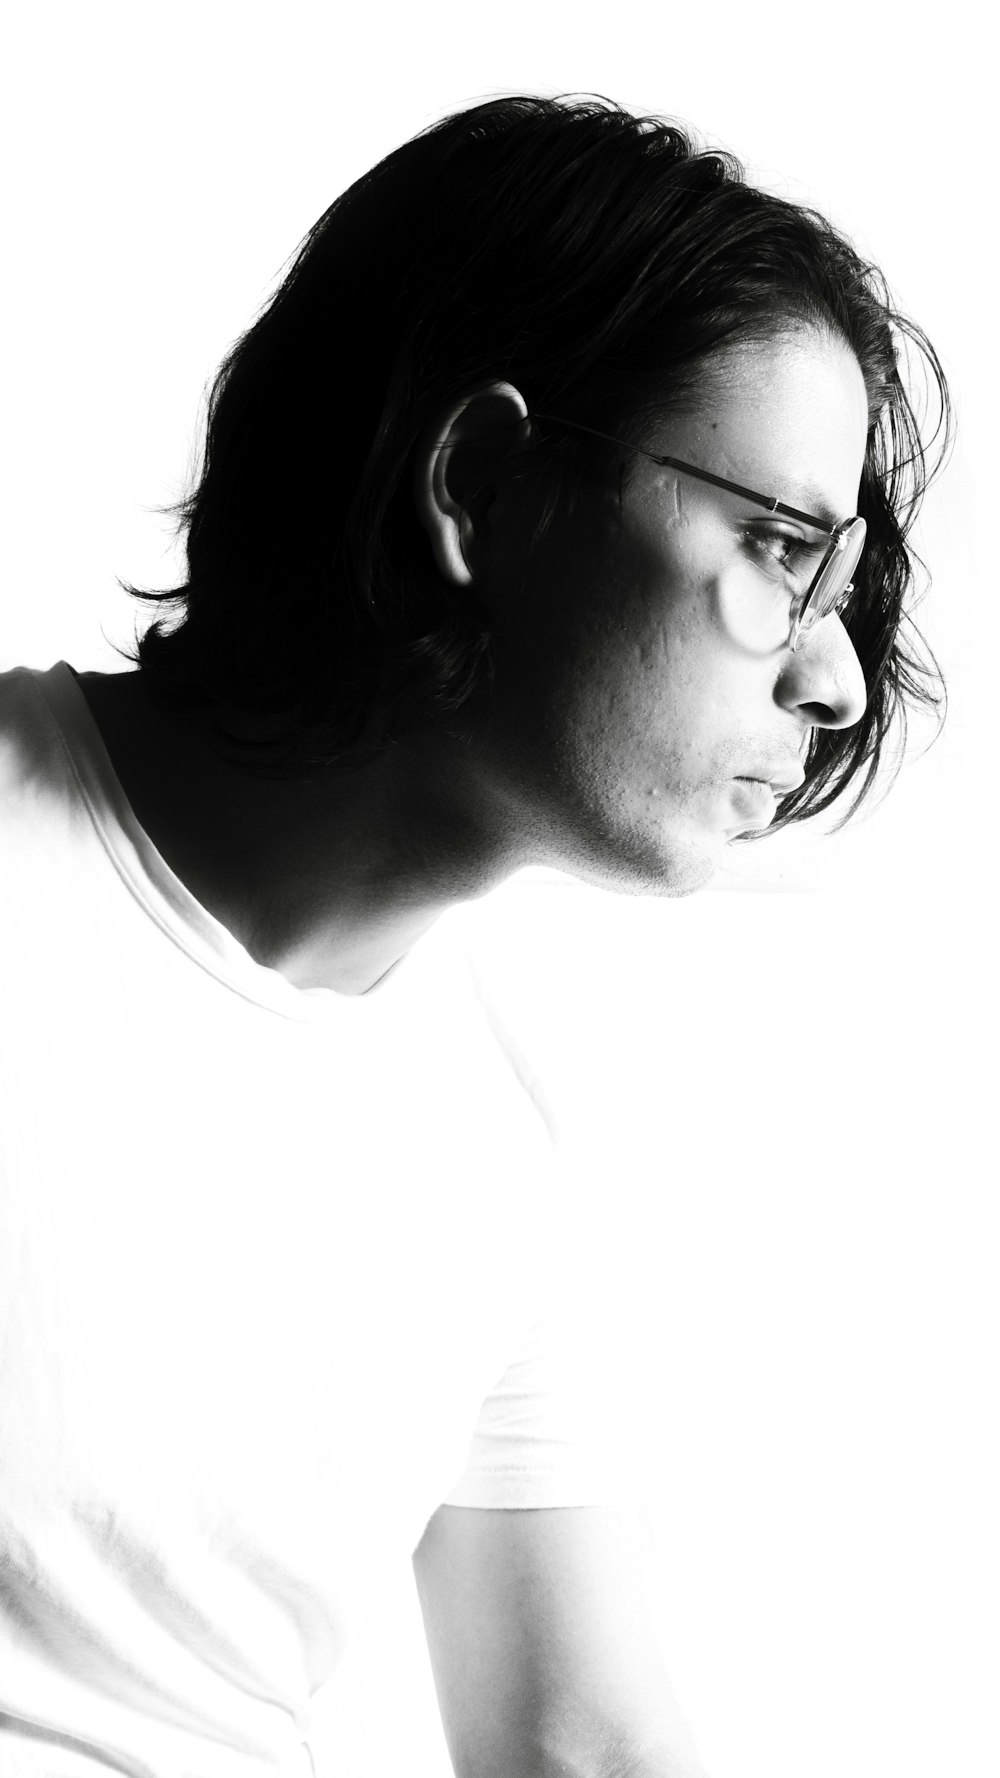 a black and white photo of a person with glasses